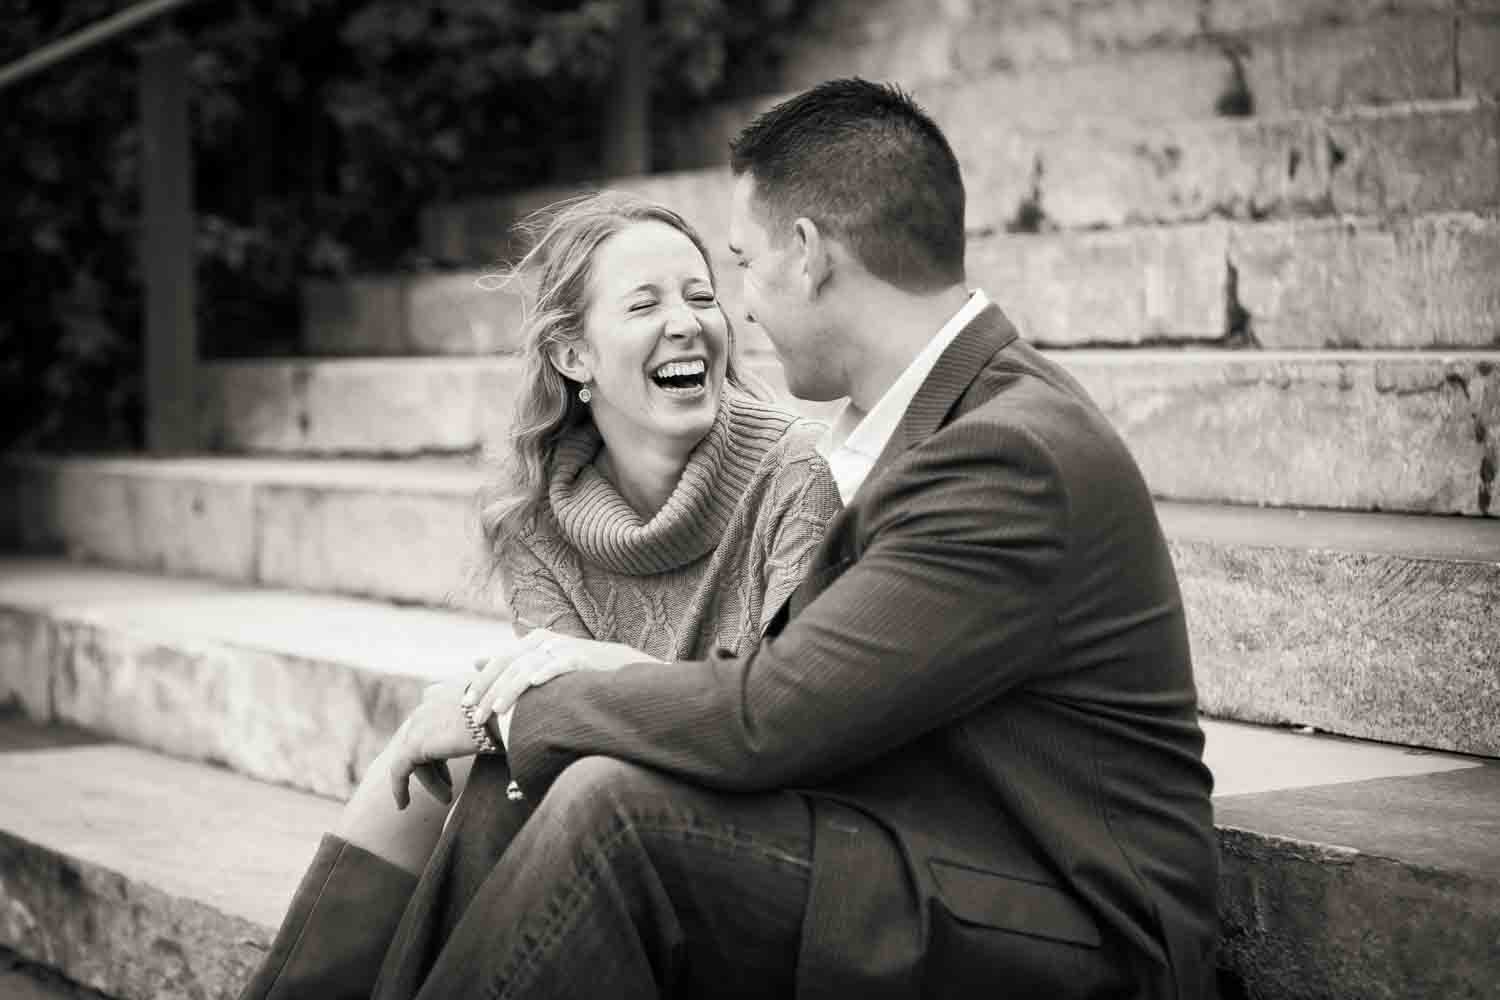 Black and white photo of woman laughing with man